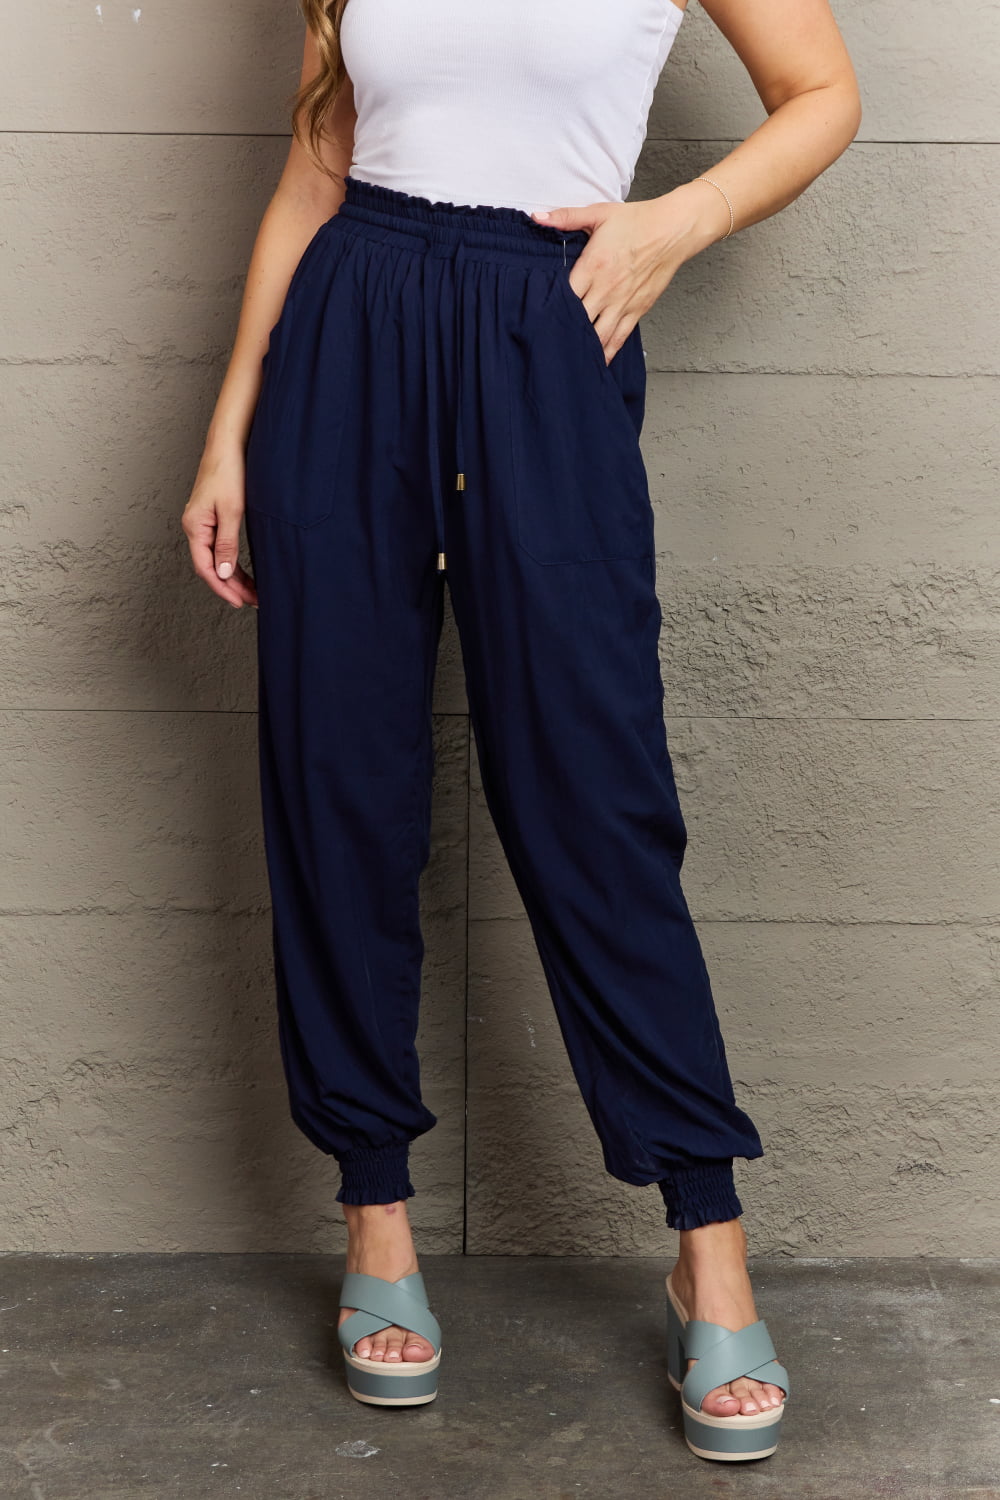 Trendsi Cupid Beauty Supplies Navy / S Women Pants Tied Long Joggers with Pockets